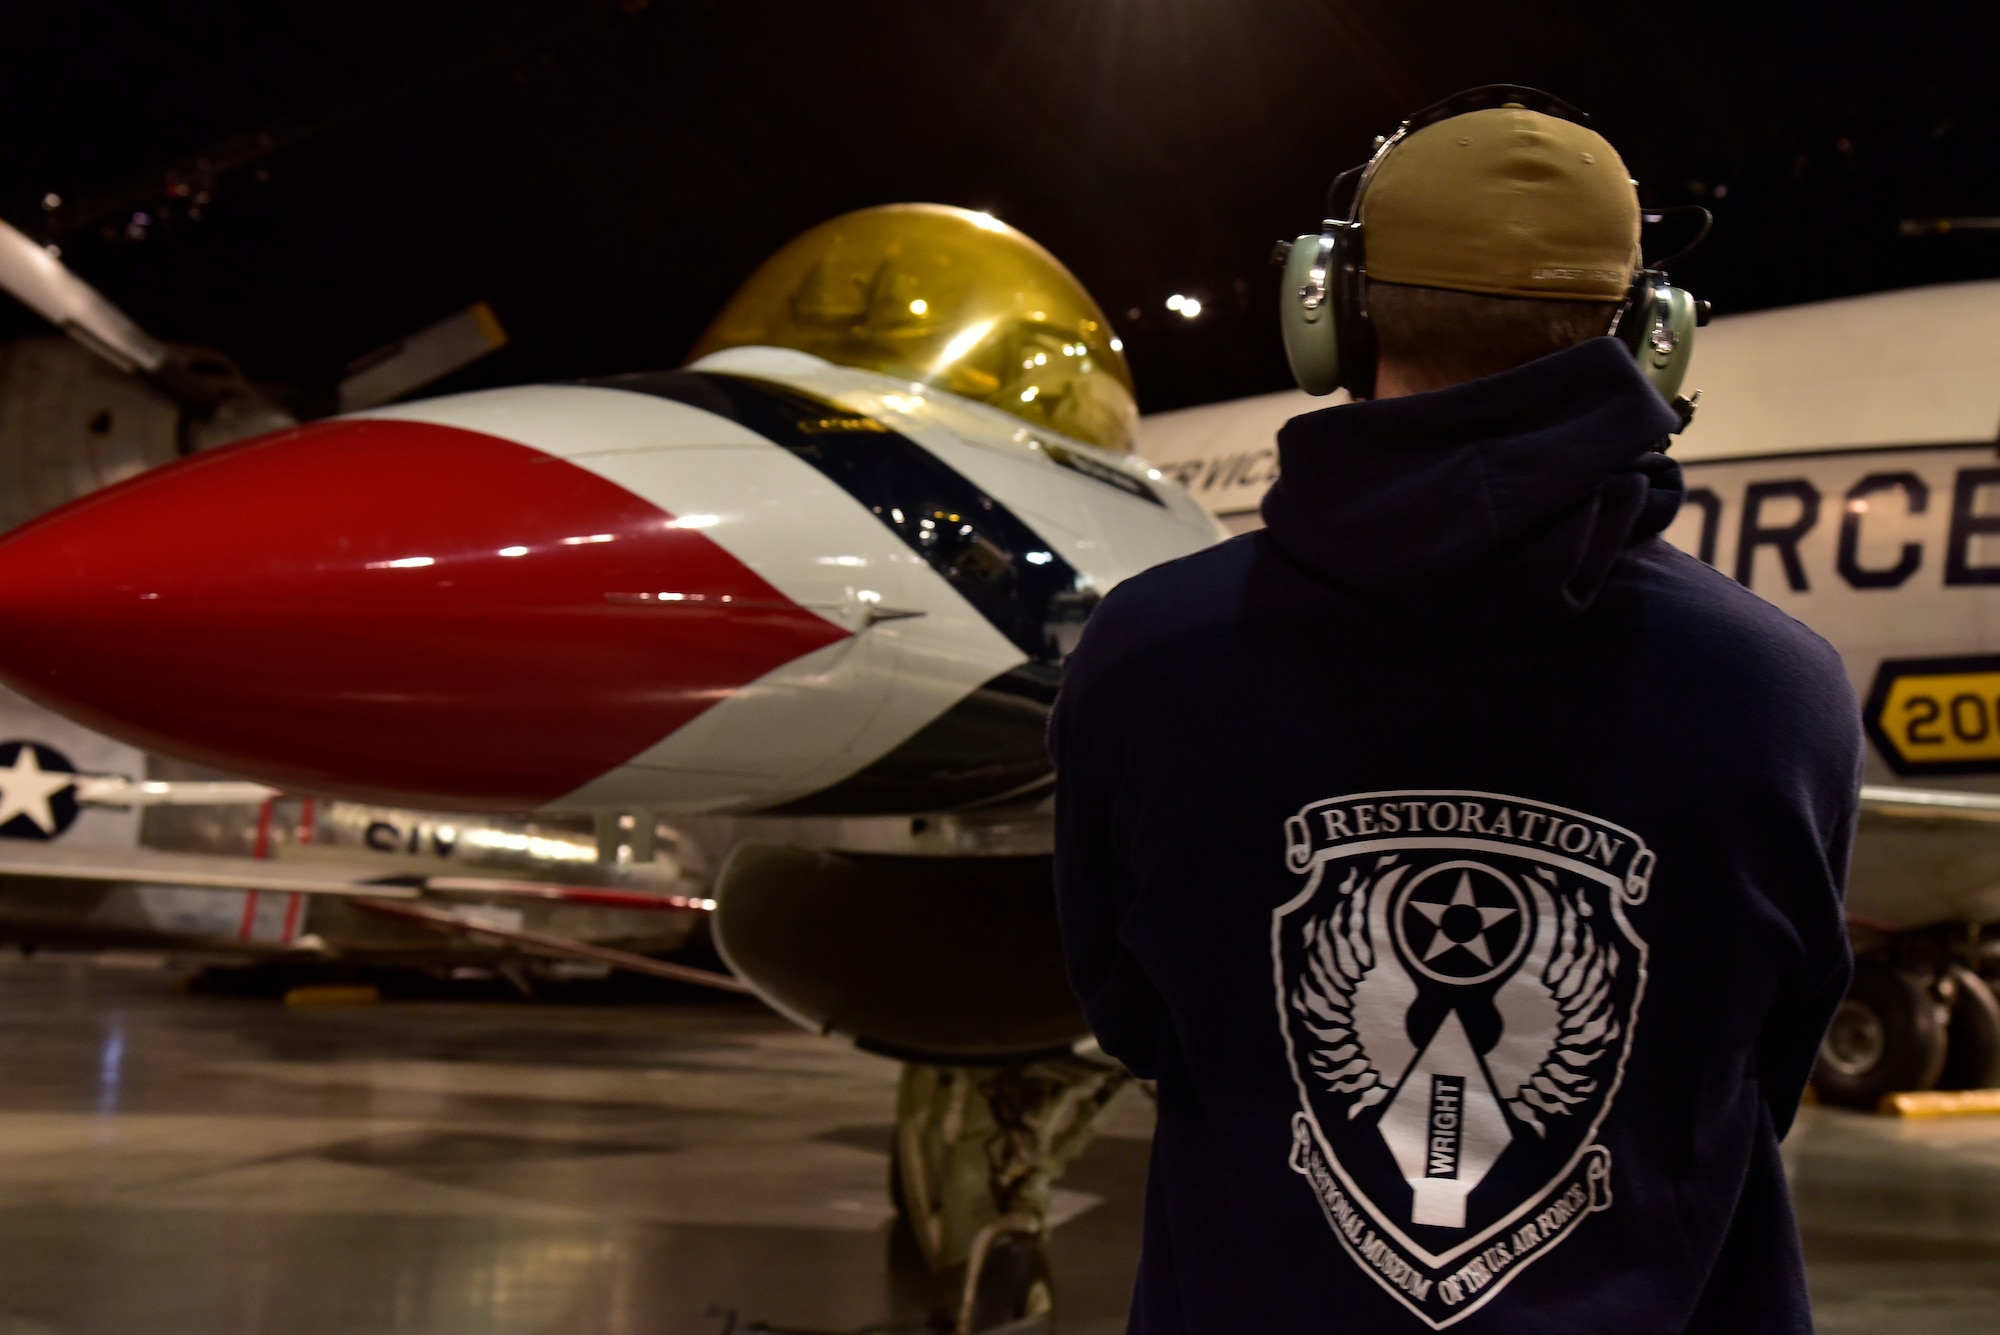 DAYTON, Ohio -- General Dynamics F-16A Fighting Falcon in the Cold War Gallery at the National Museum of the United States Air Force. A restoration crew member worked as part of a team to complete the gallery reconfiguration on Jan. 26, 2017. (U.S. Air Force photo)